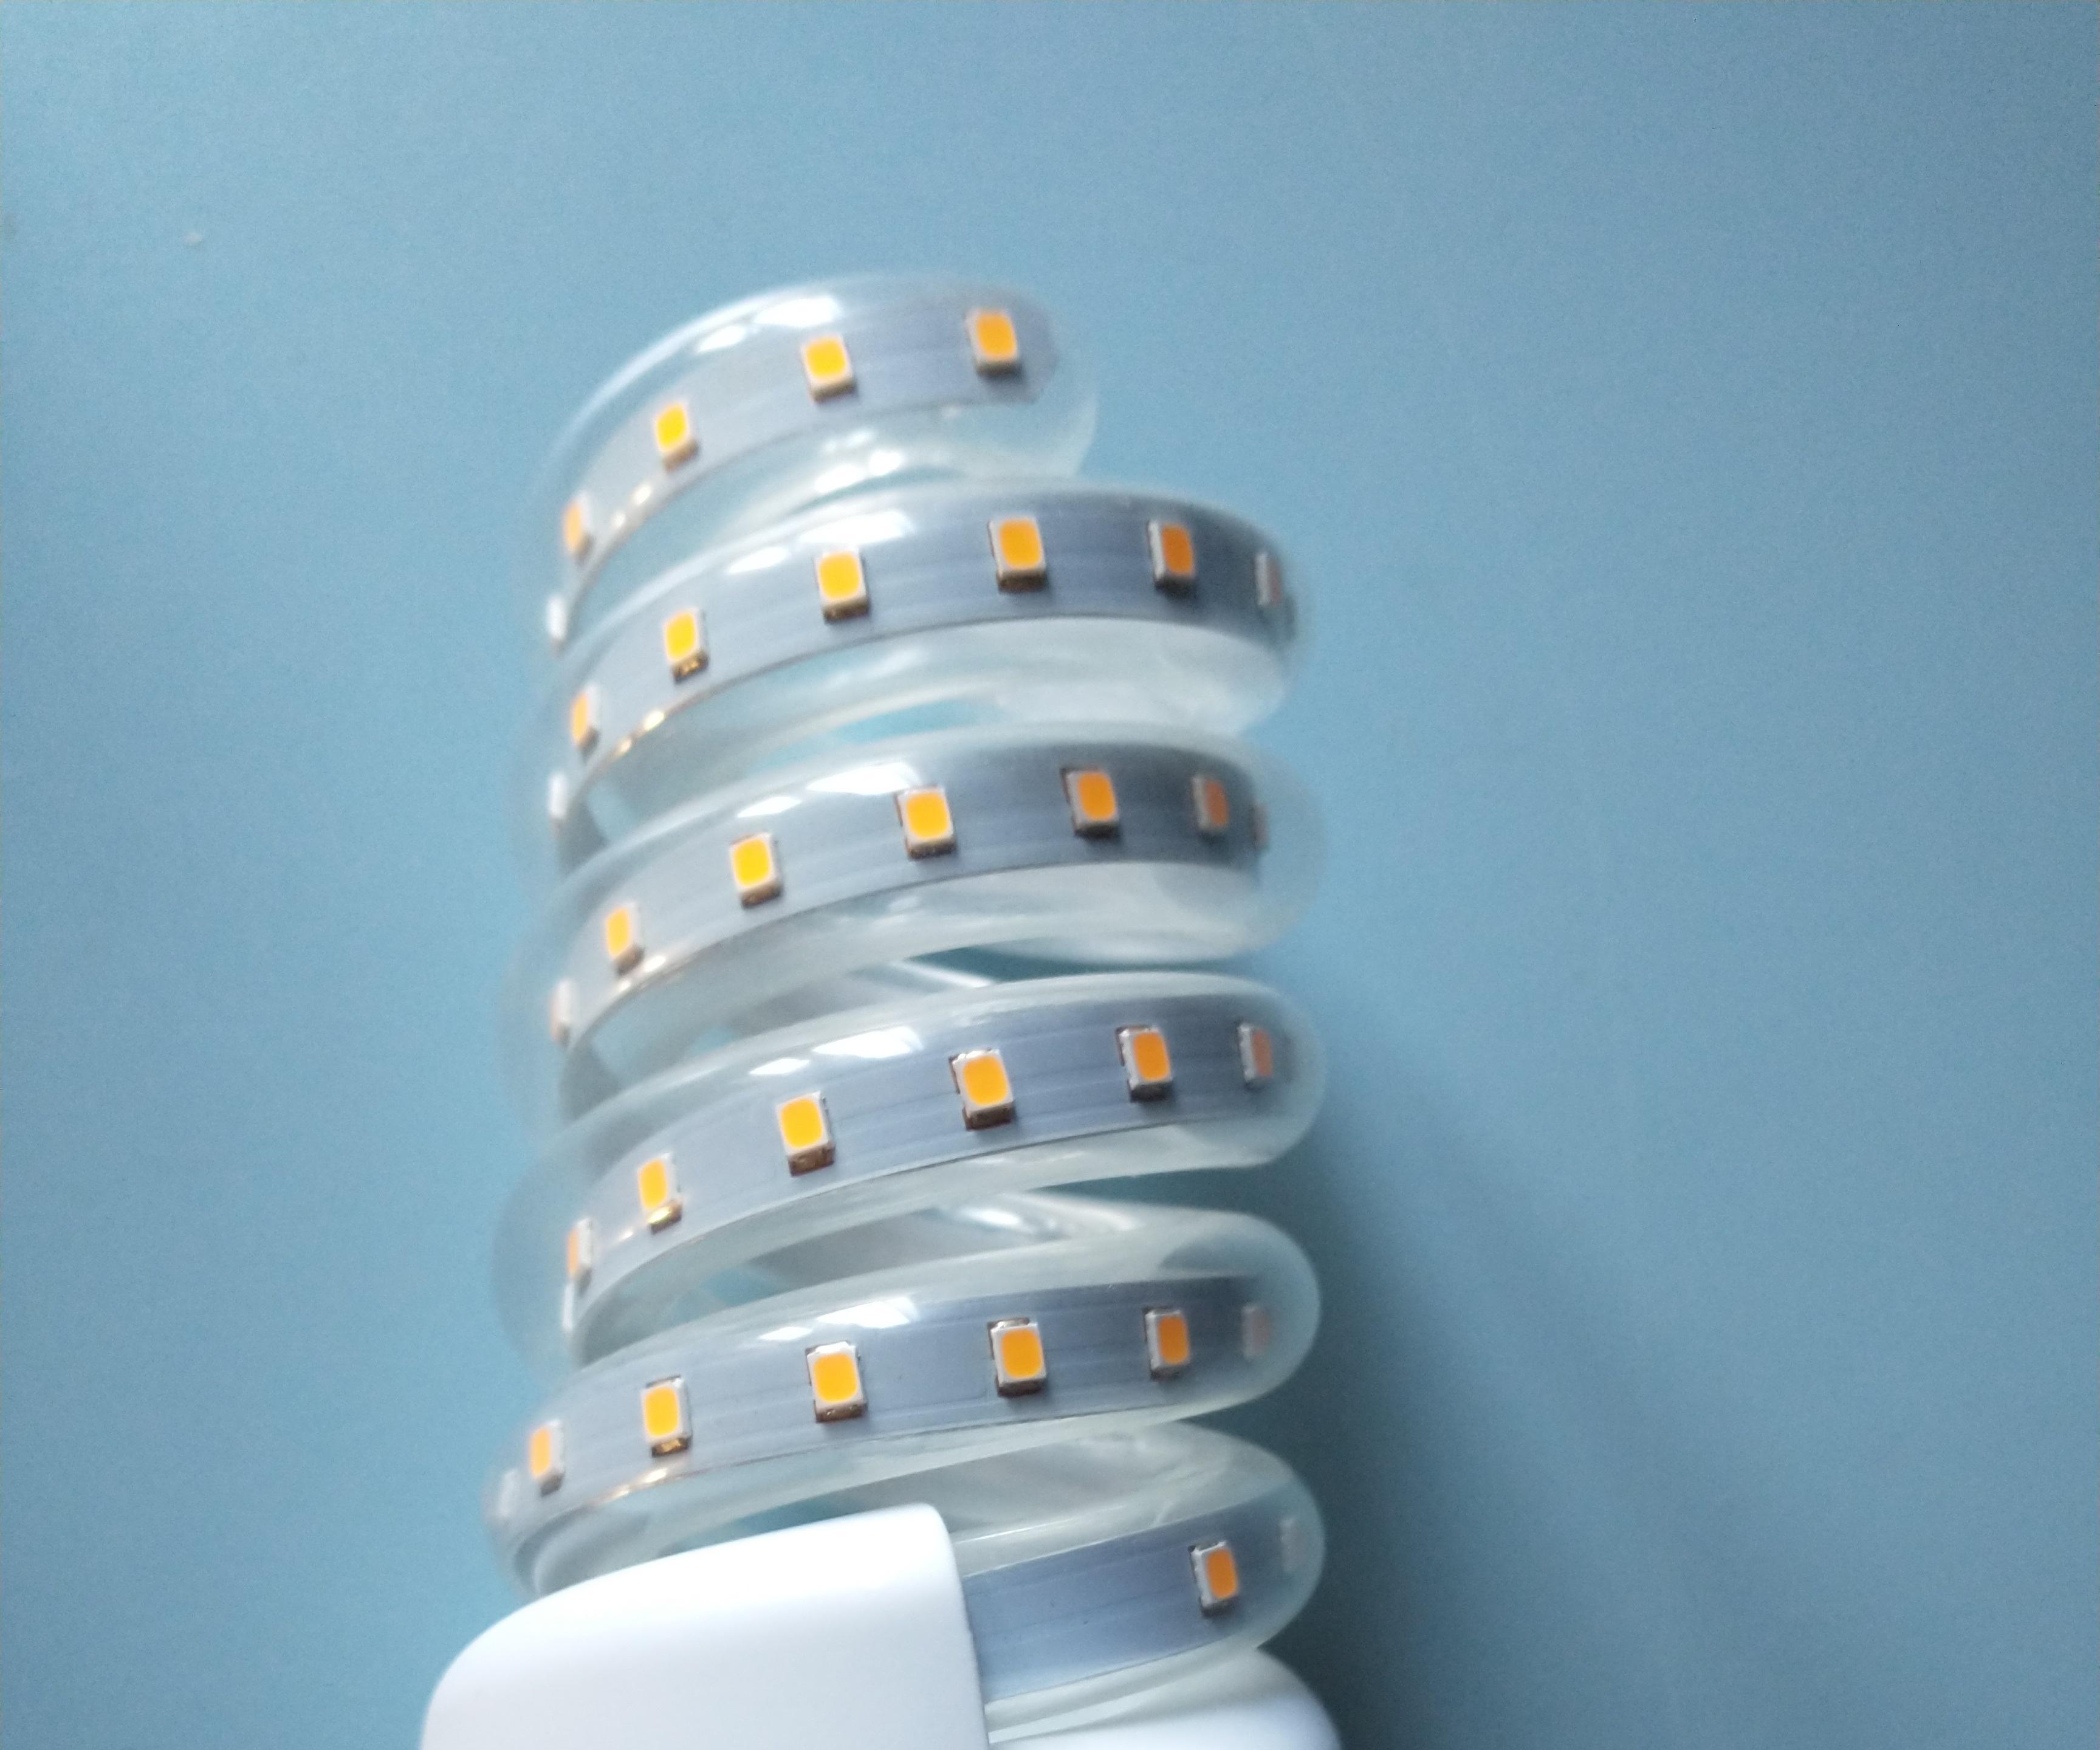 HOW to Recycle the LED Strips of a Spiral LED Bulb (a “reverse Engineering” Study of a Commercial LED Bulb)